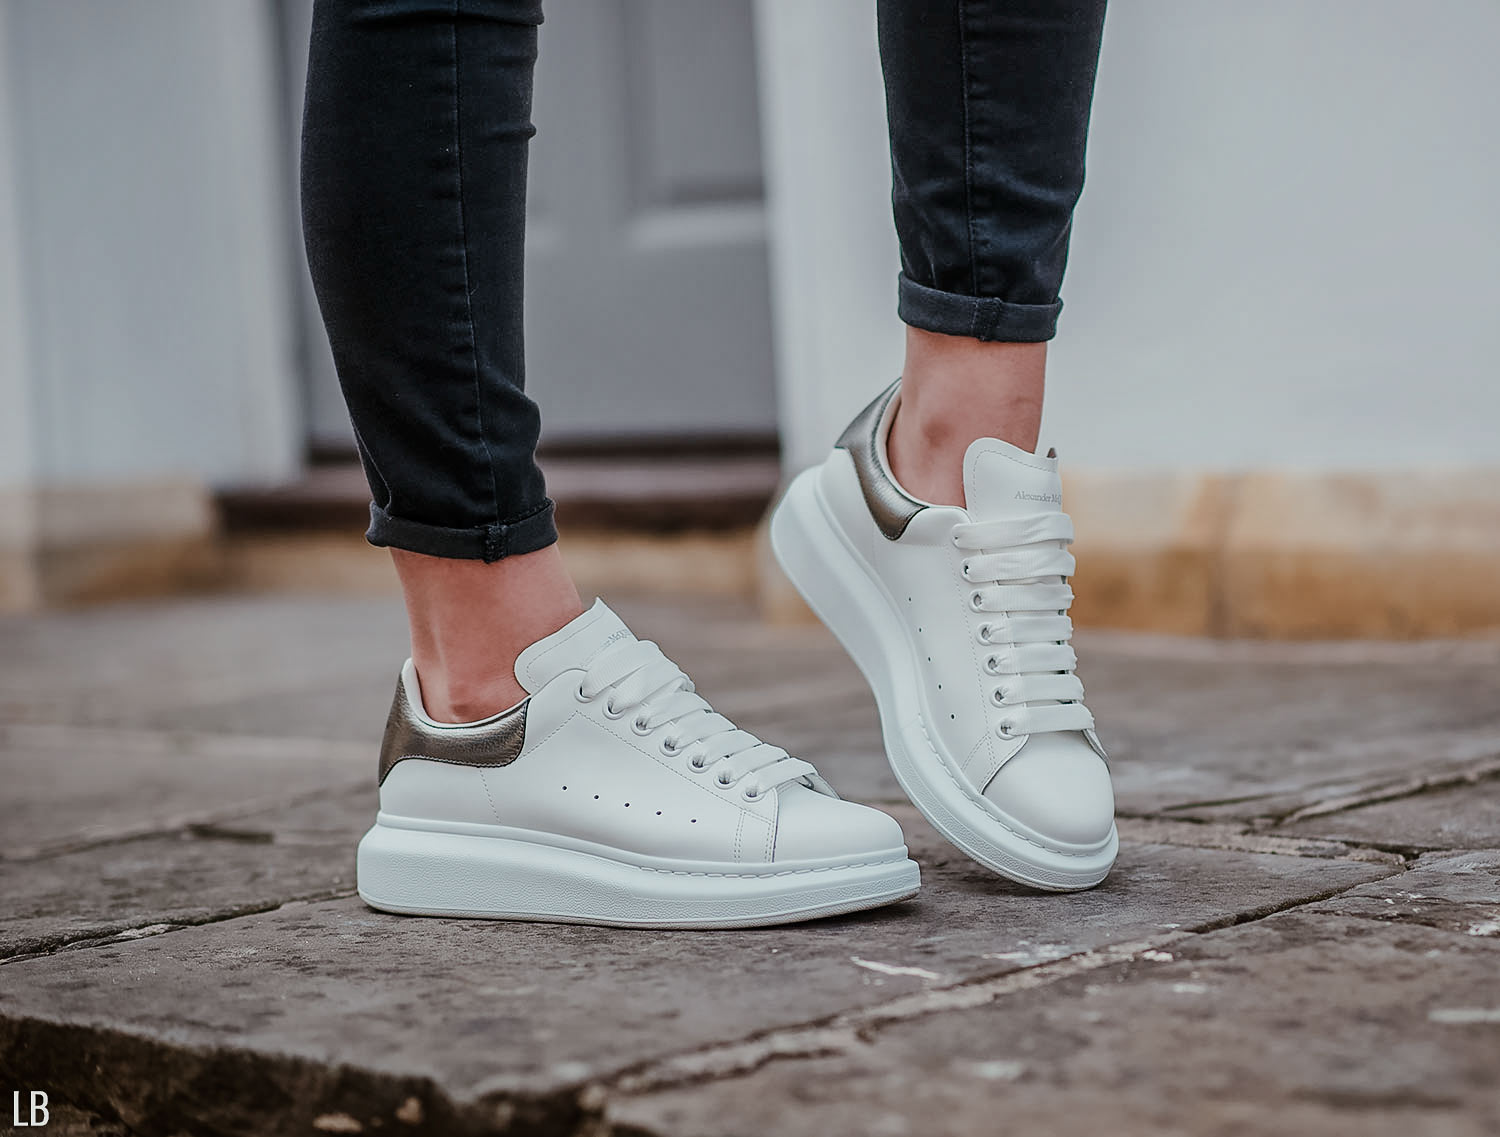 How to Style Alexander McQueen Sneakers: 10 Ways - The Refined